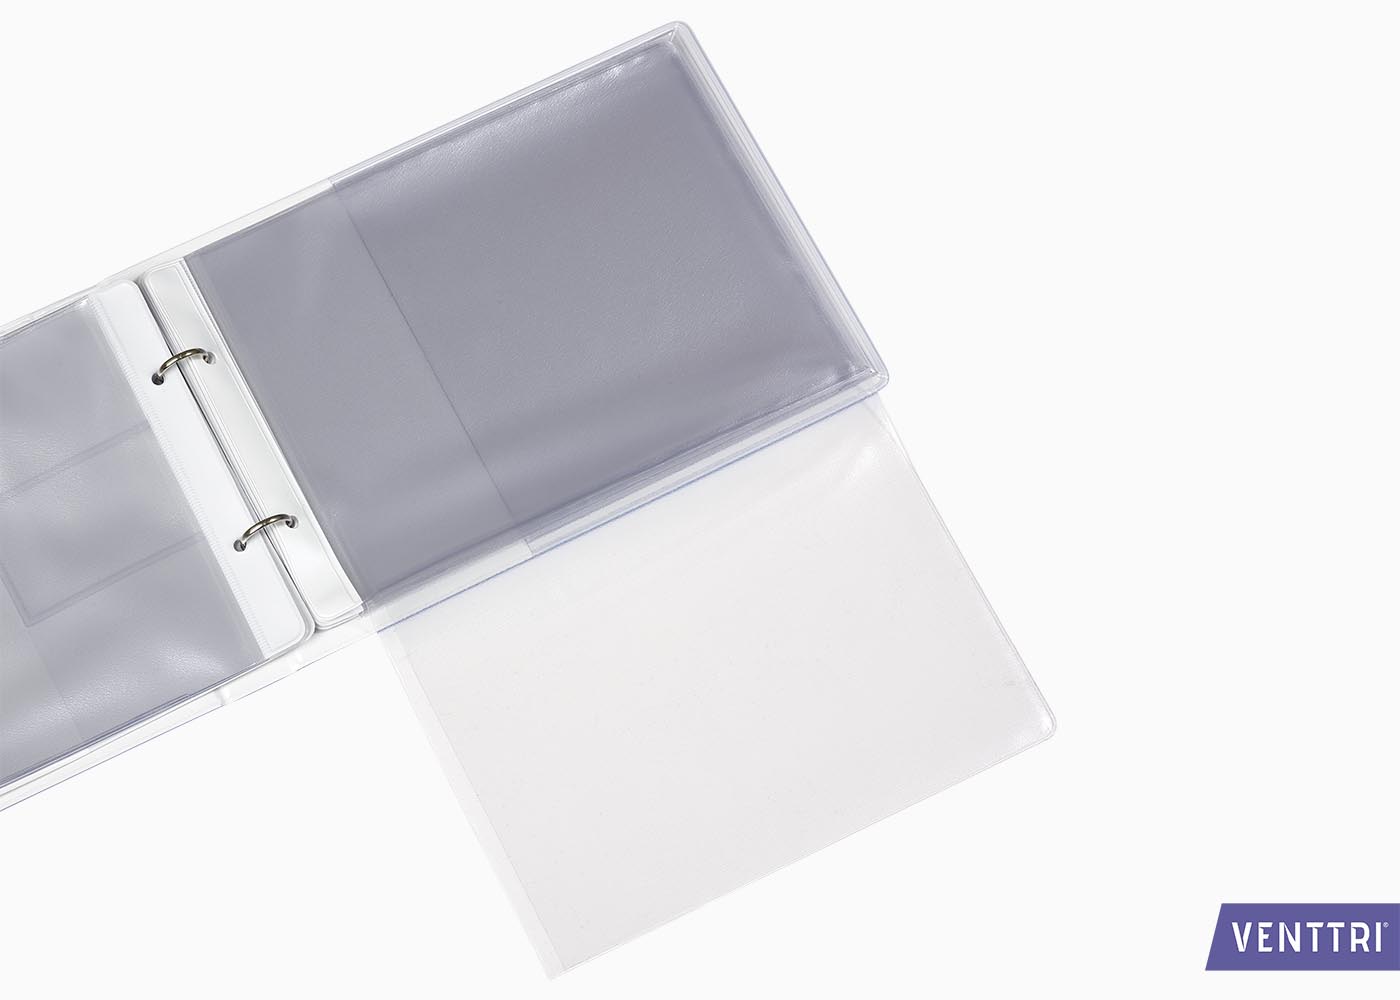 Driver's folder with plastic sleeves - Venttri